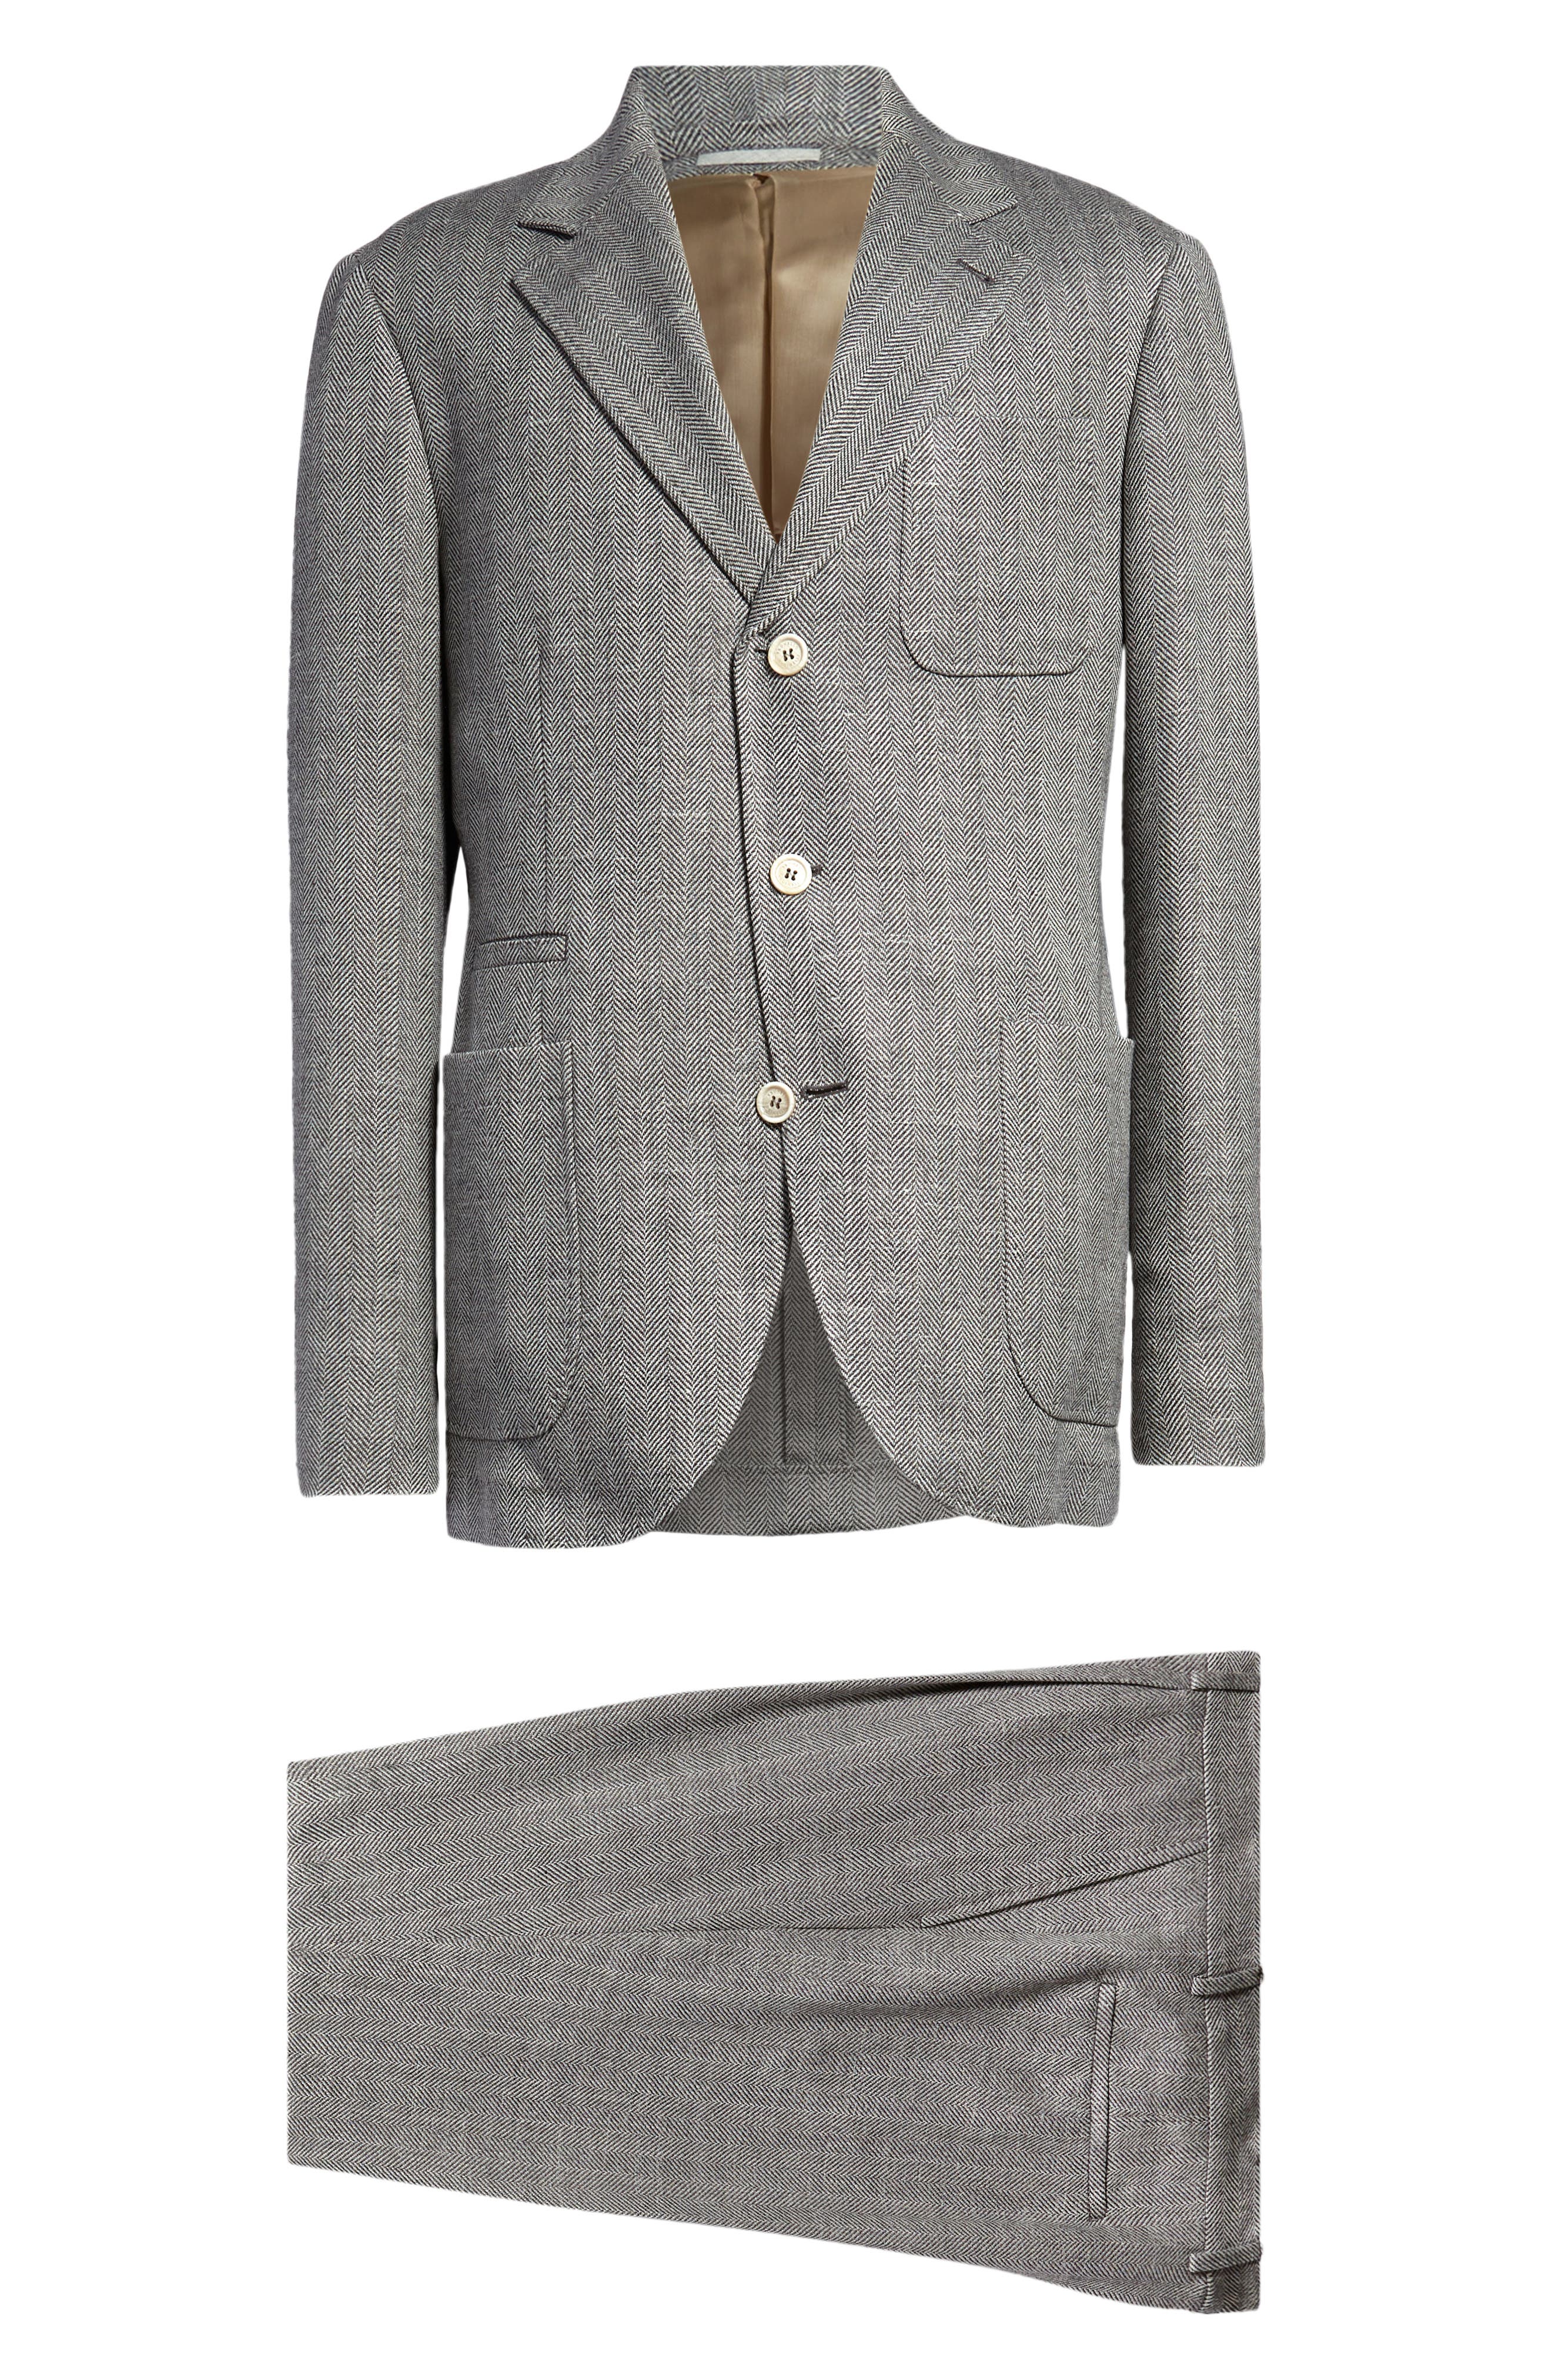 Mens Suits Brunello Cucinelli Suits Brunello Cucinelli Other Materials Suit in Beige Grey Save 29% for Men 